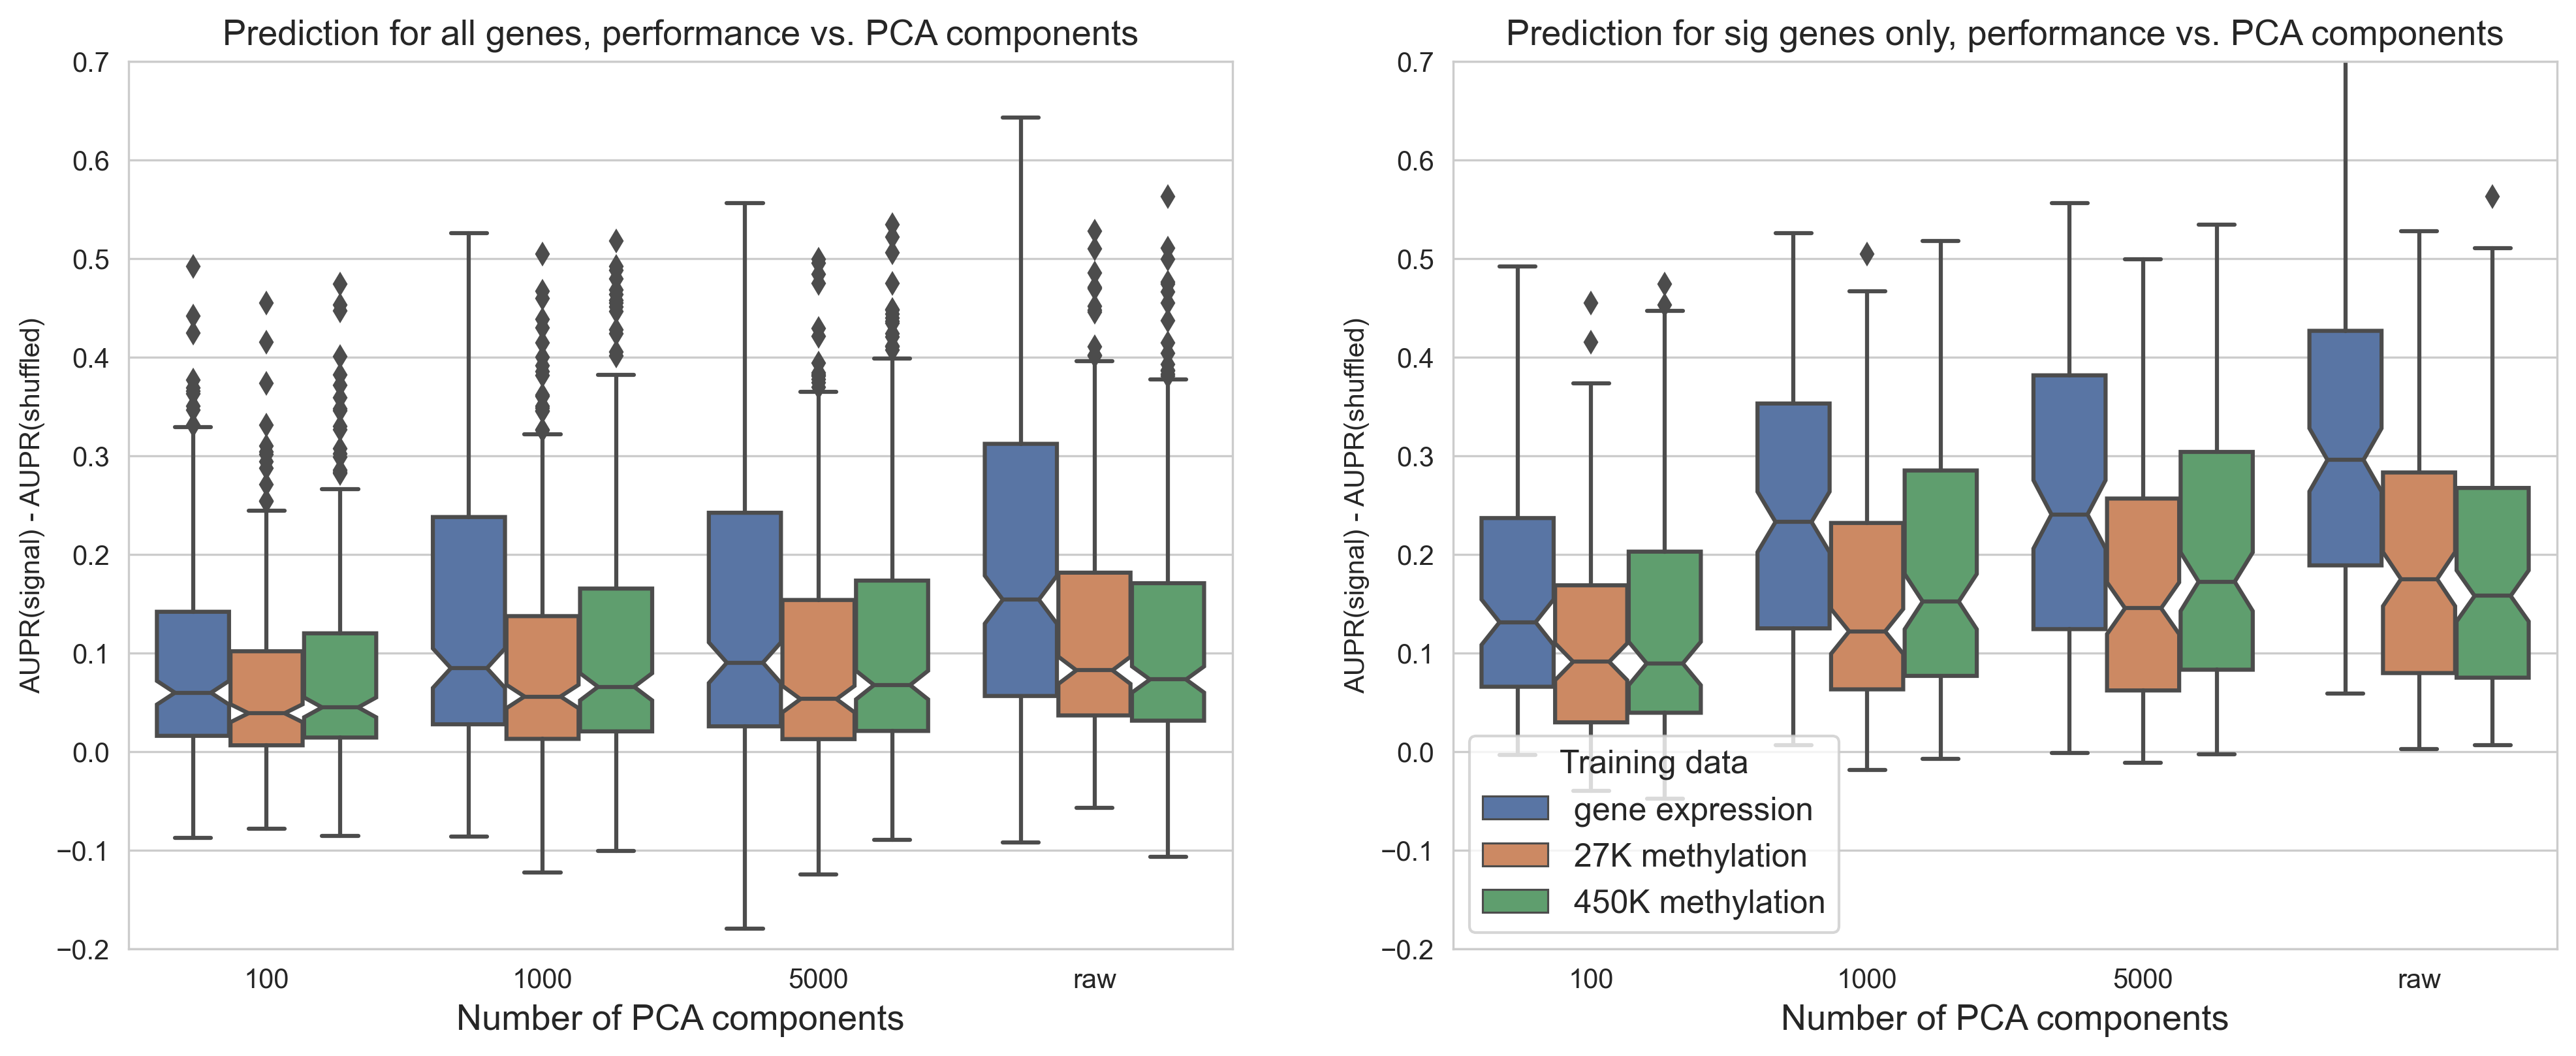 Figure S5: Predictive performance for genes in the cancer-related gene set, using each of the three data types as predictors. The x-axis shows the number of PCA components used as features, “raw” = no PCA compression.